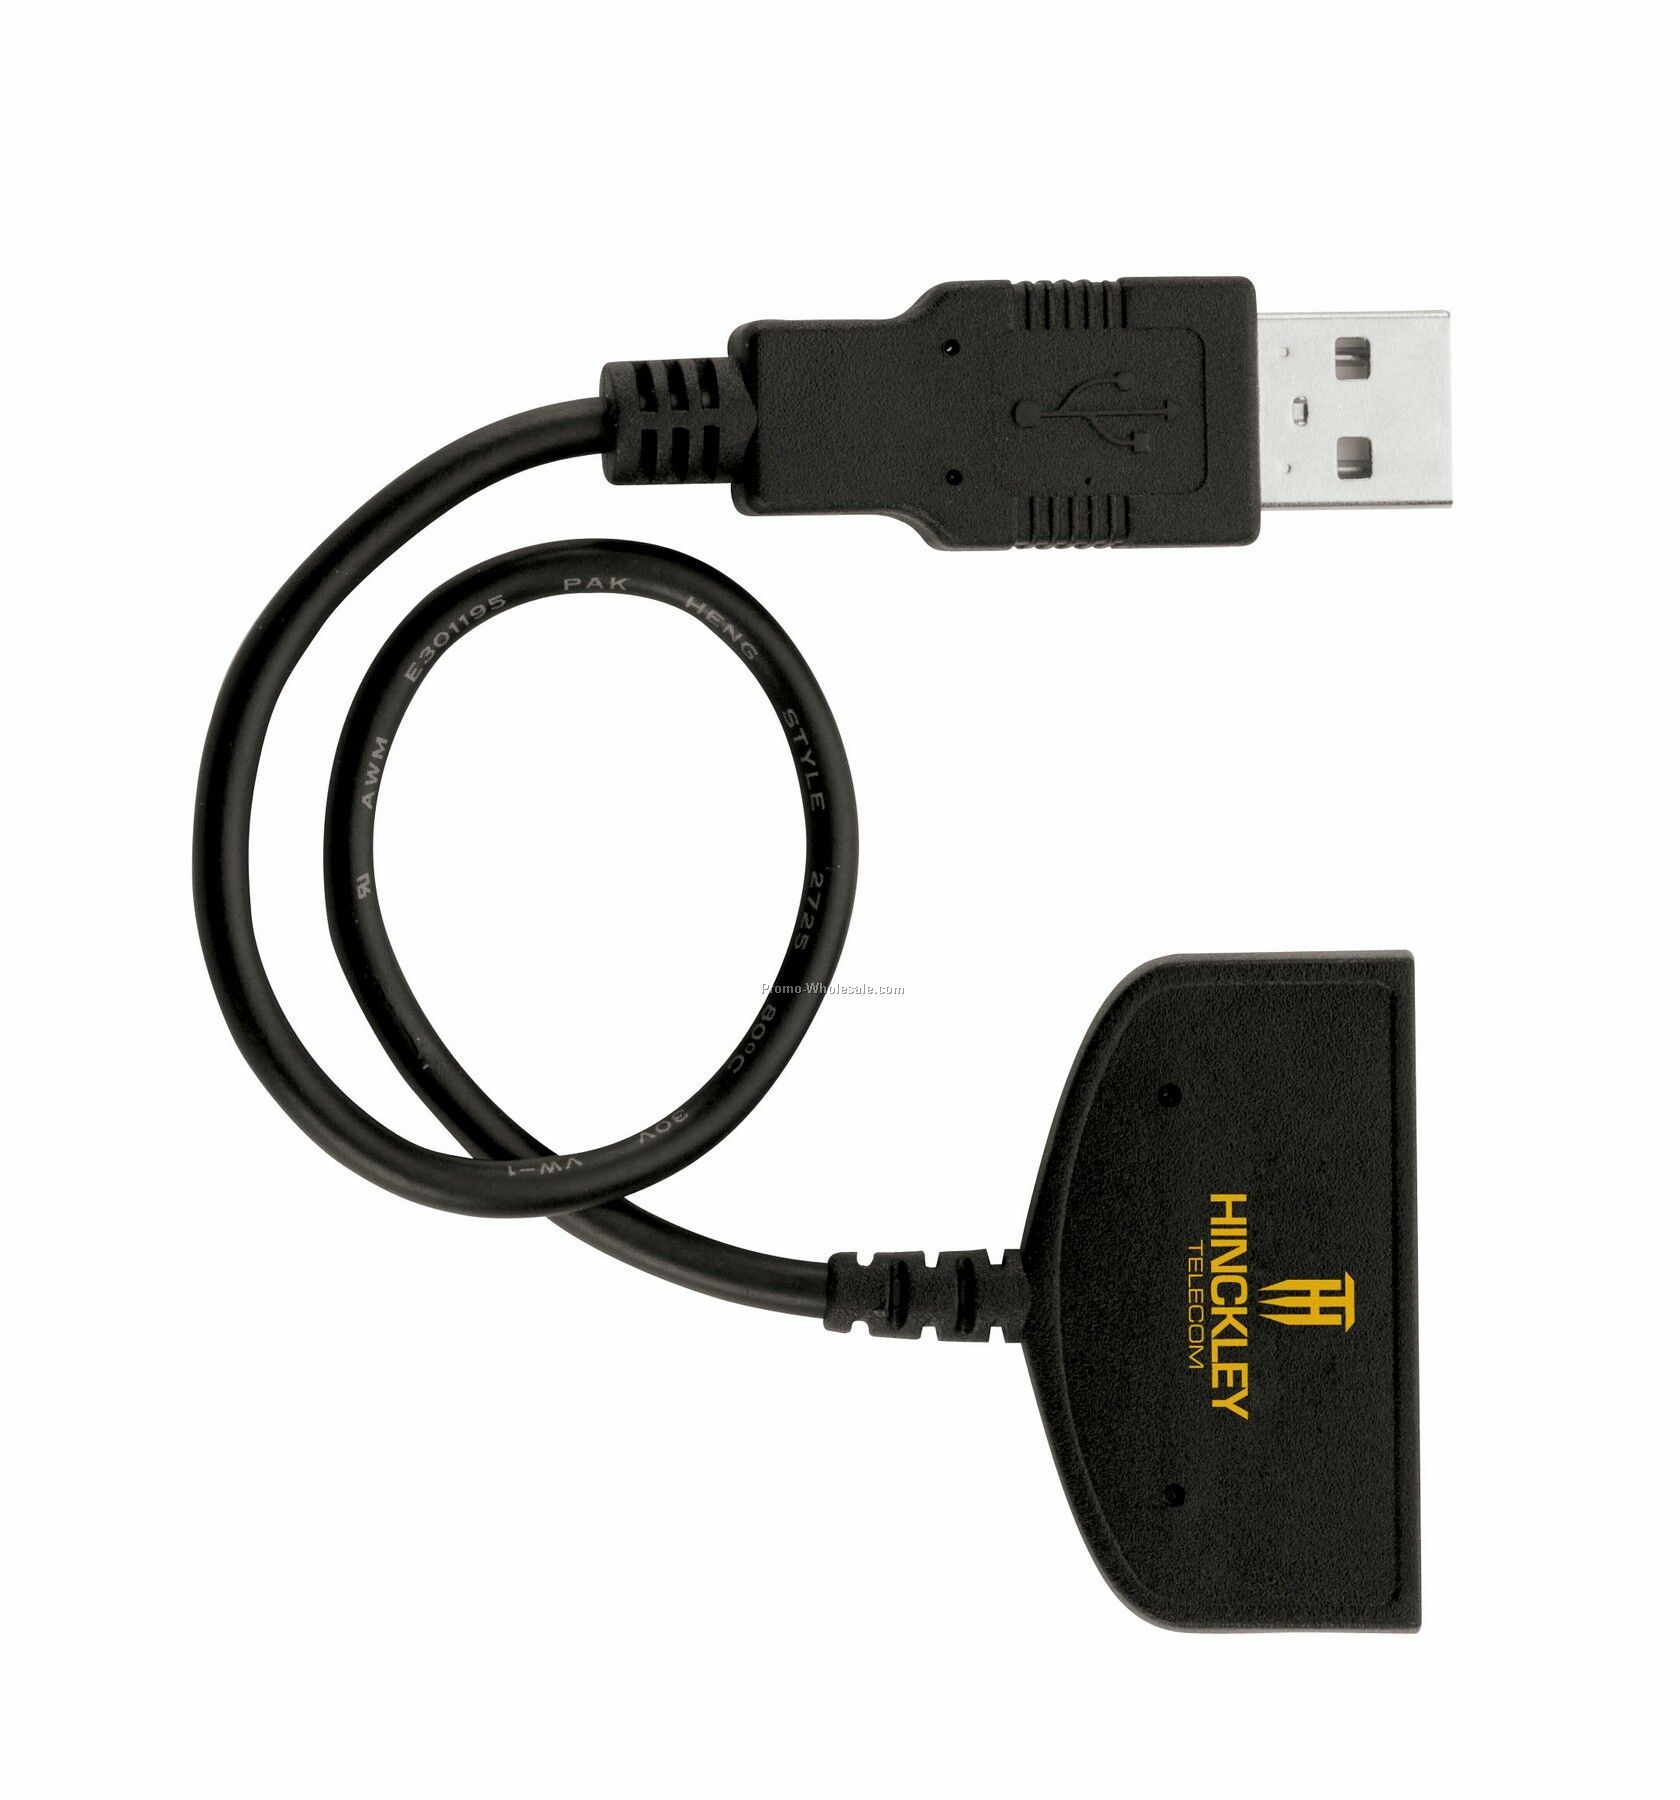 Giftcor Black Mogo Mouse X54 Cable USB Charger 1-5/8"x1-1/2"x3/8"